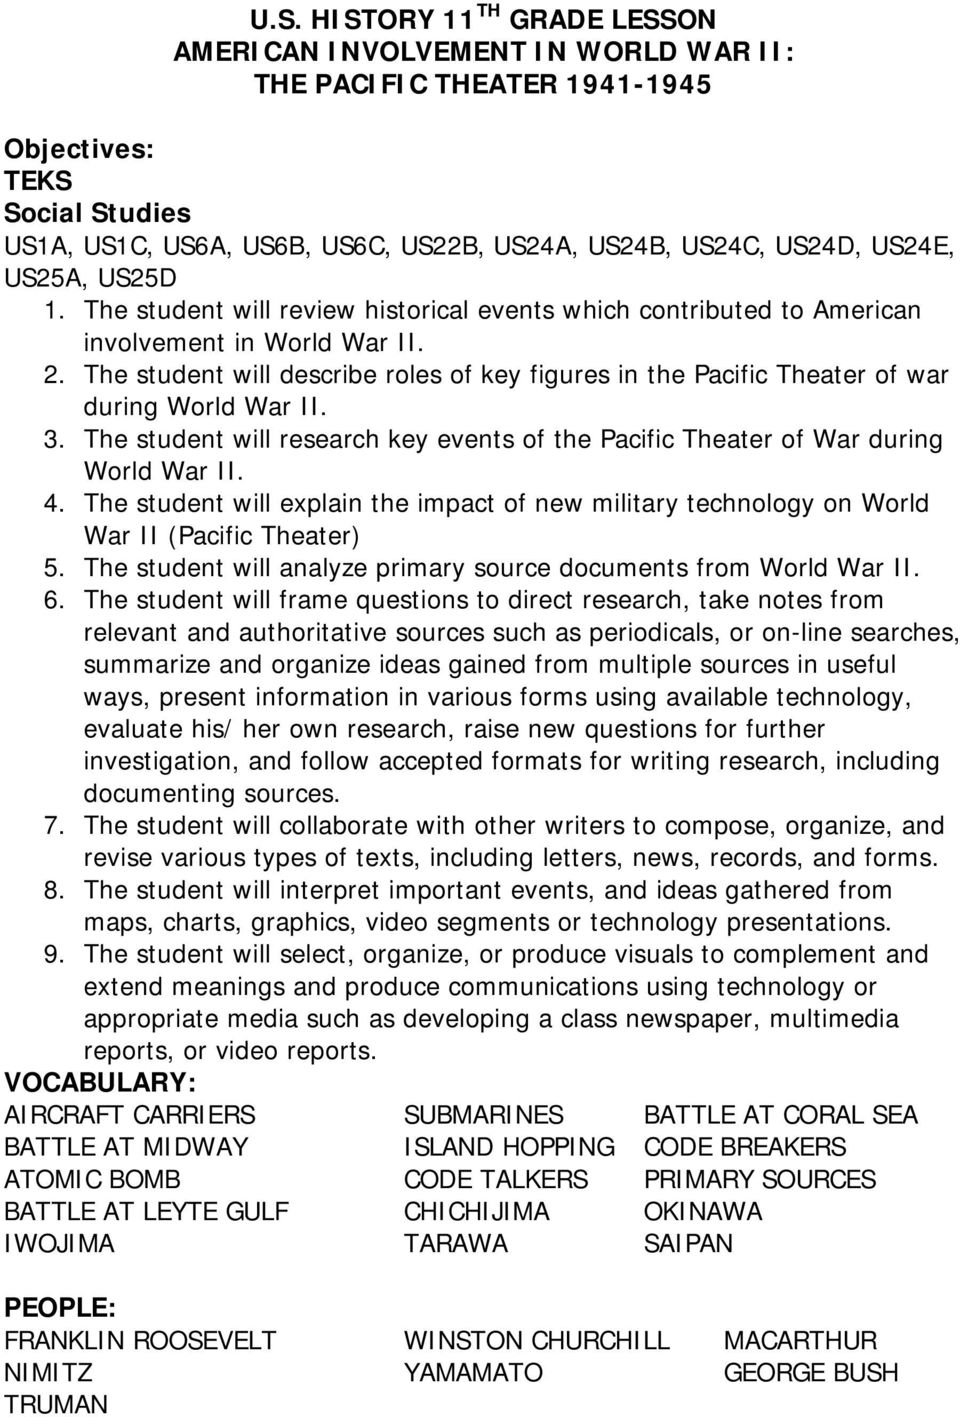 The student will describe roles of key figures in the Pacific Theater of war during World War II. 3. The student will research key events of the Pacific Theater of War during World War II. 4.